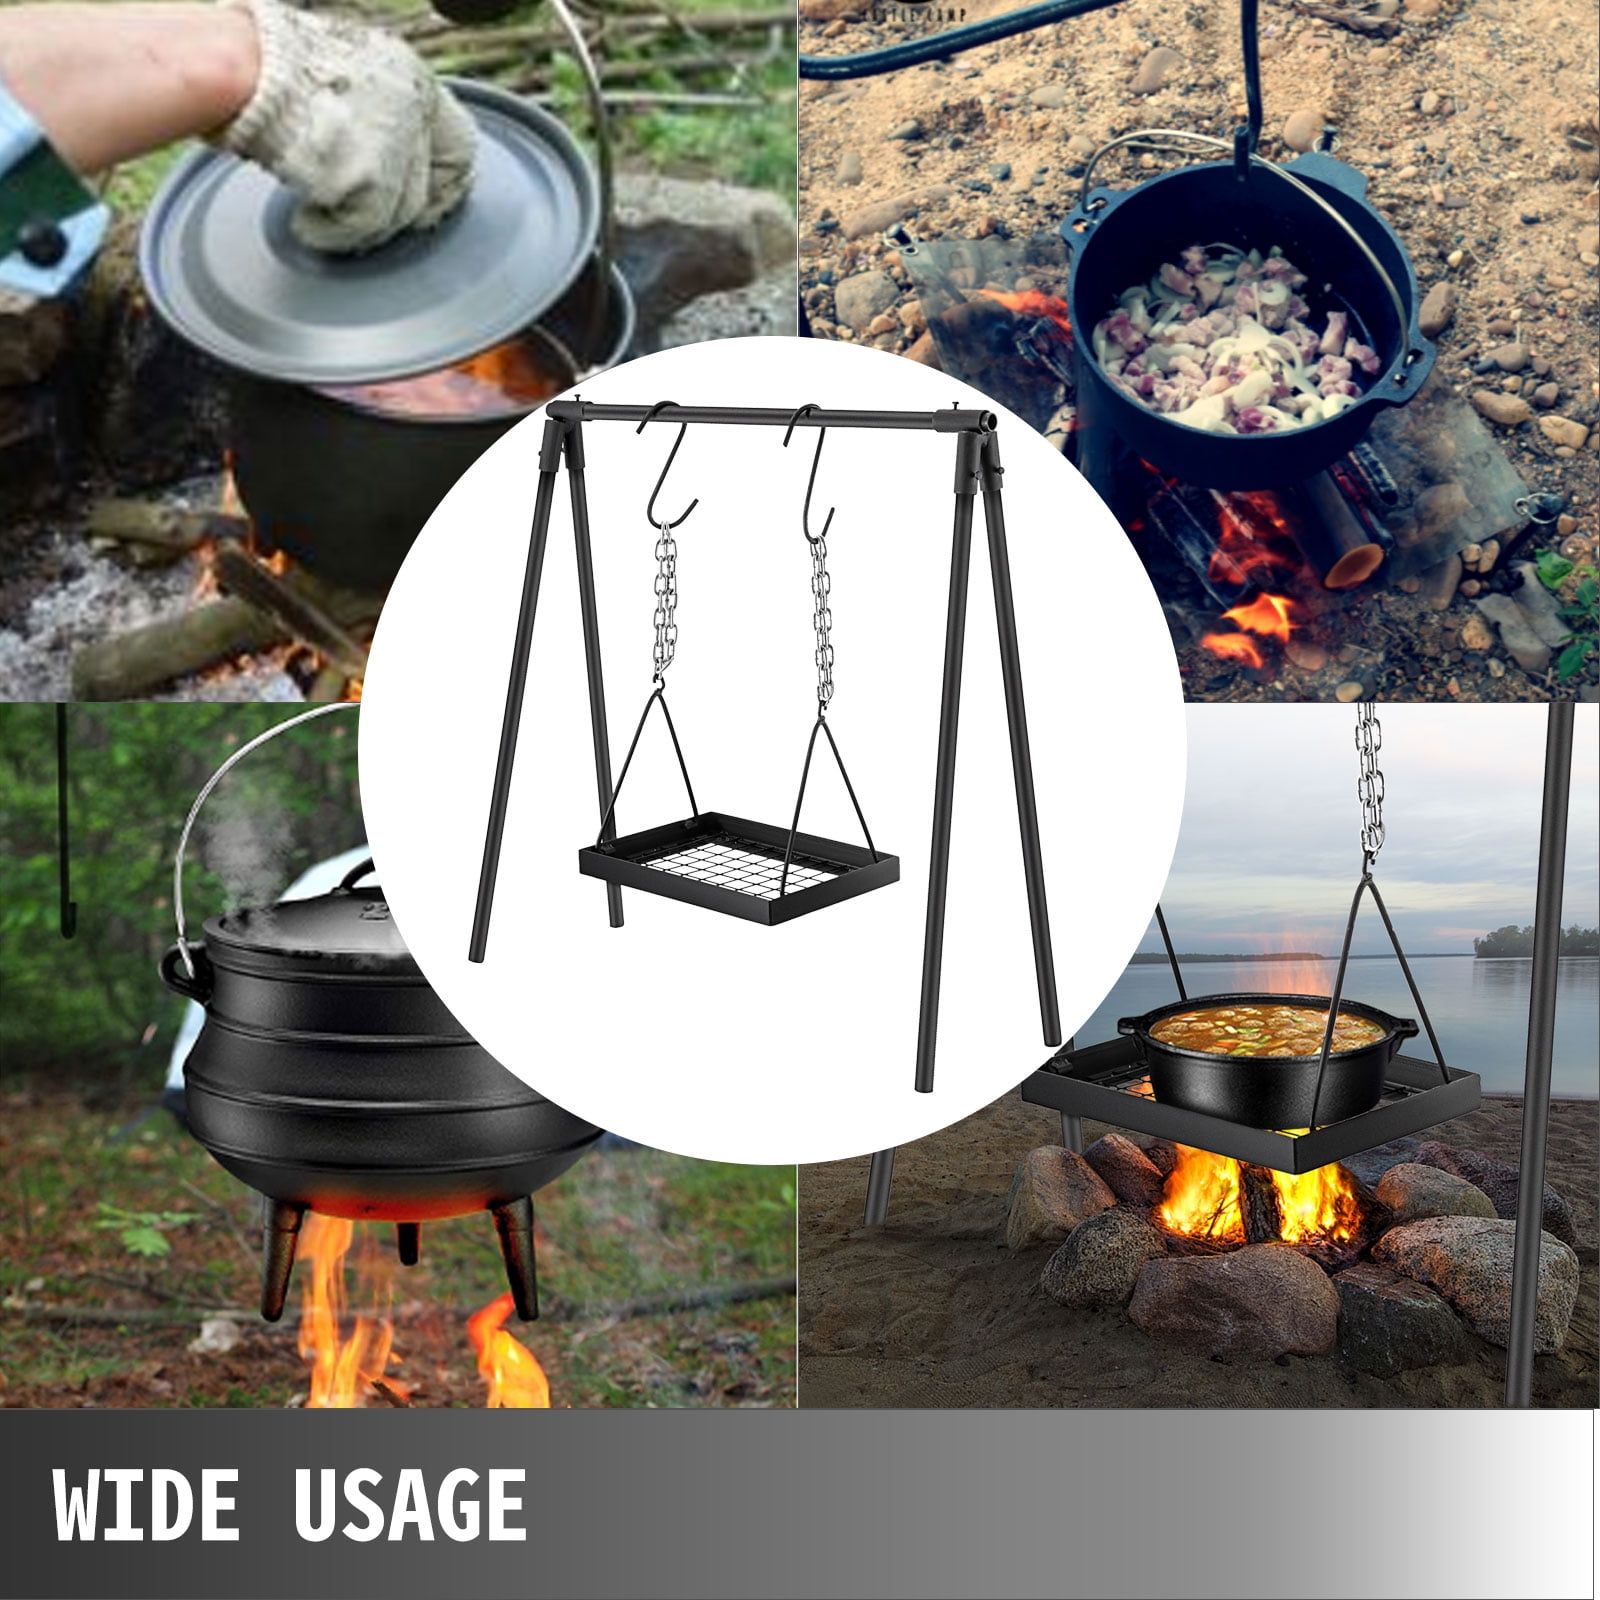 Details about   Outdoor Campfire Adjustable Swing Grill For Cooking Camping Hiking W/ Carry Bag 